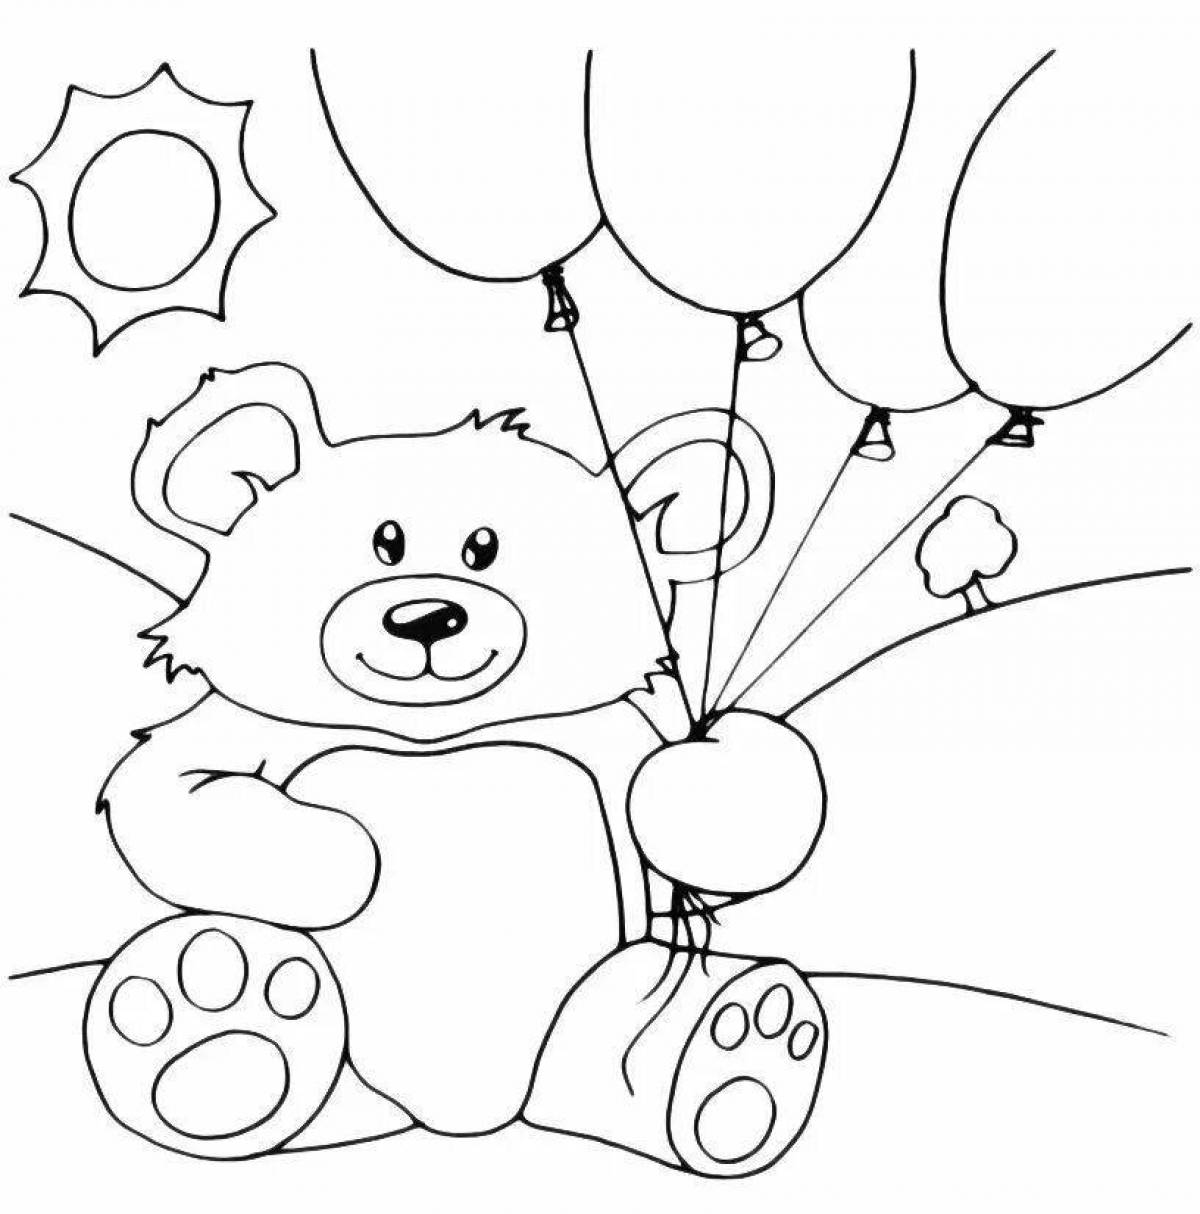 Colorful teddy bear with balls